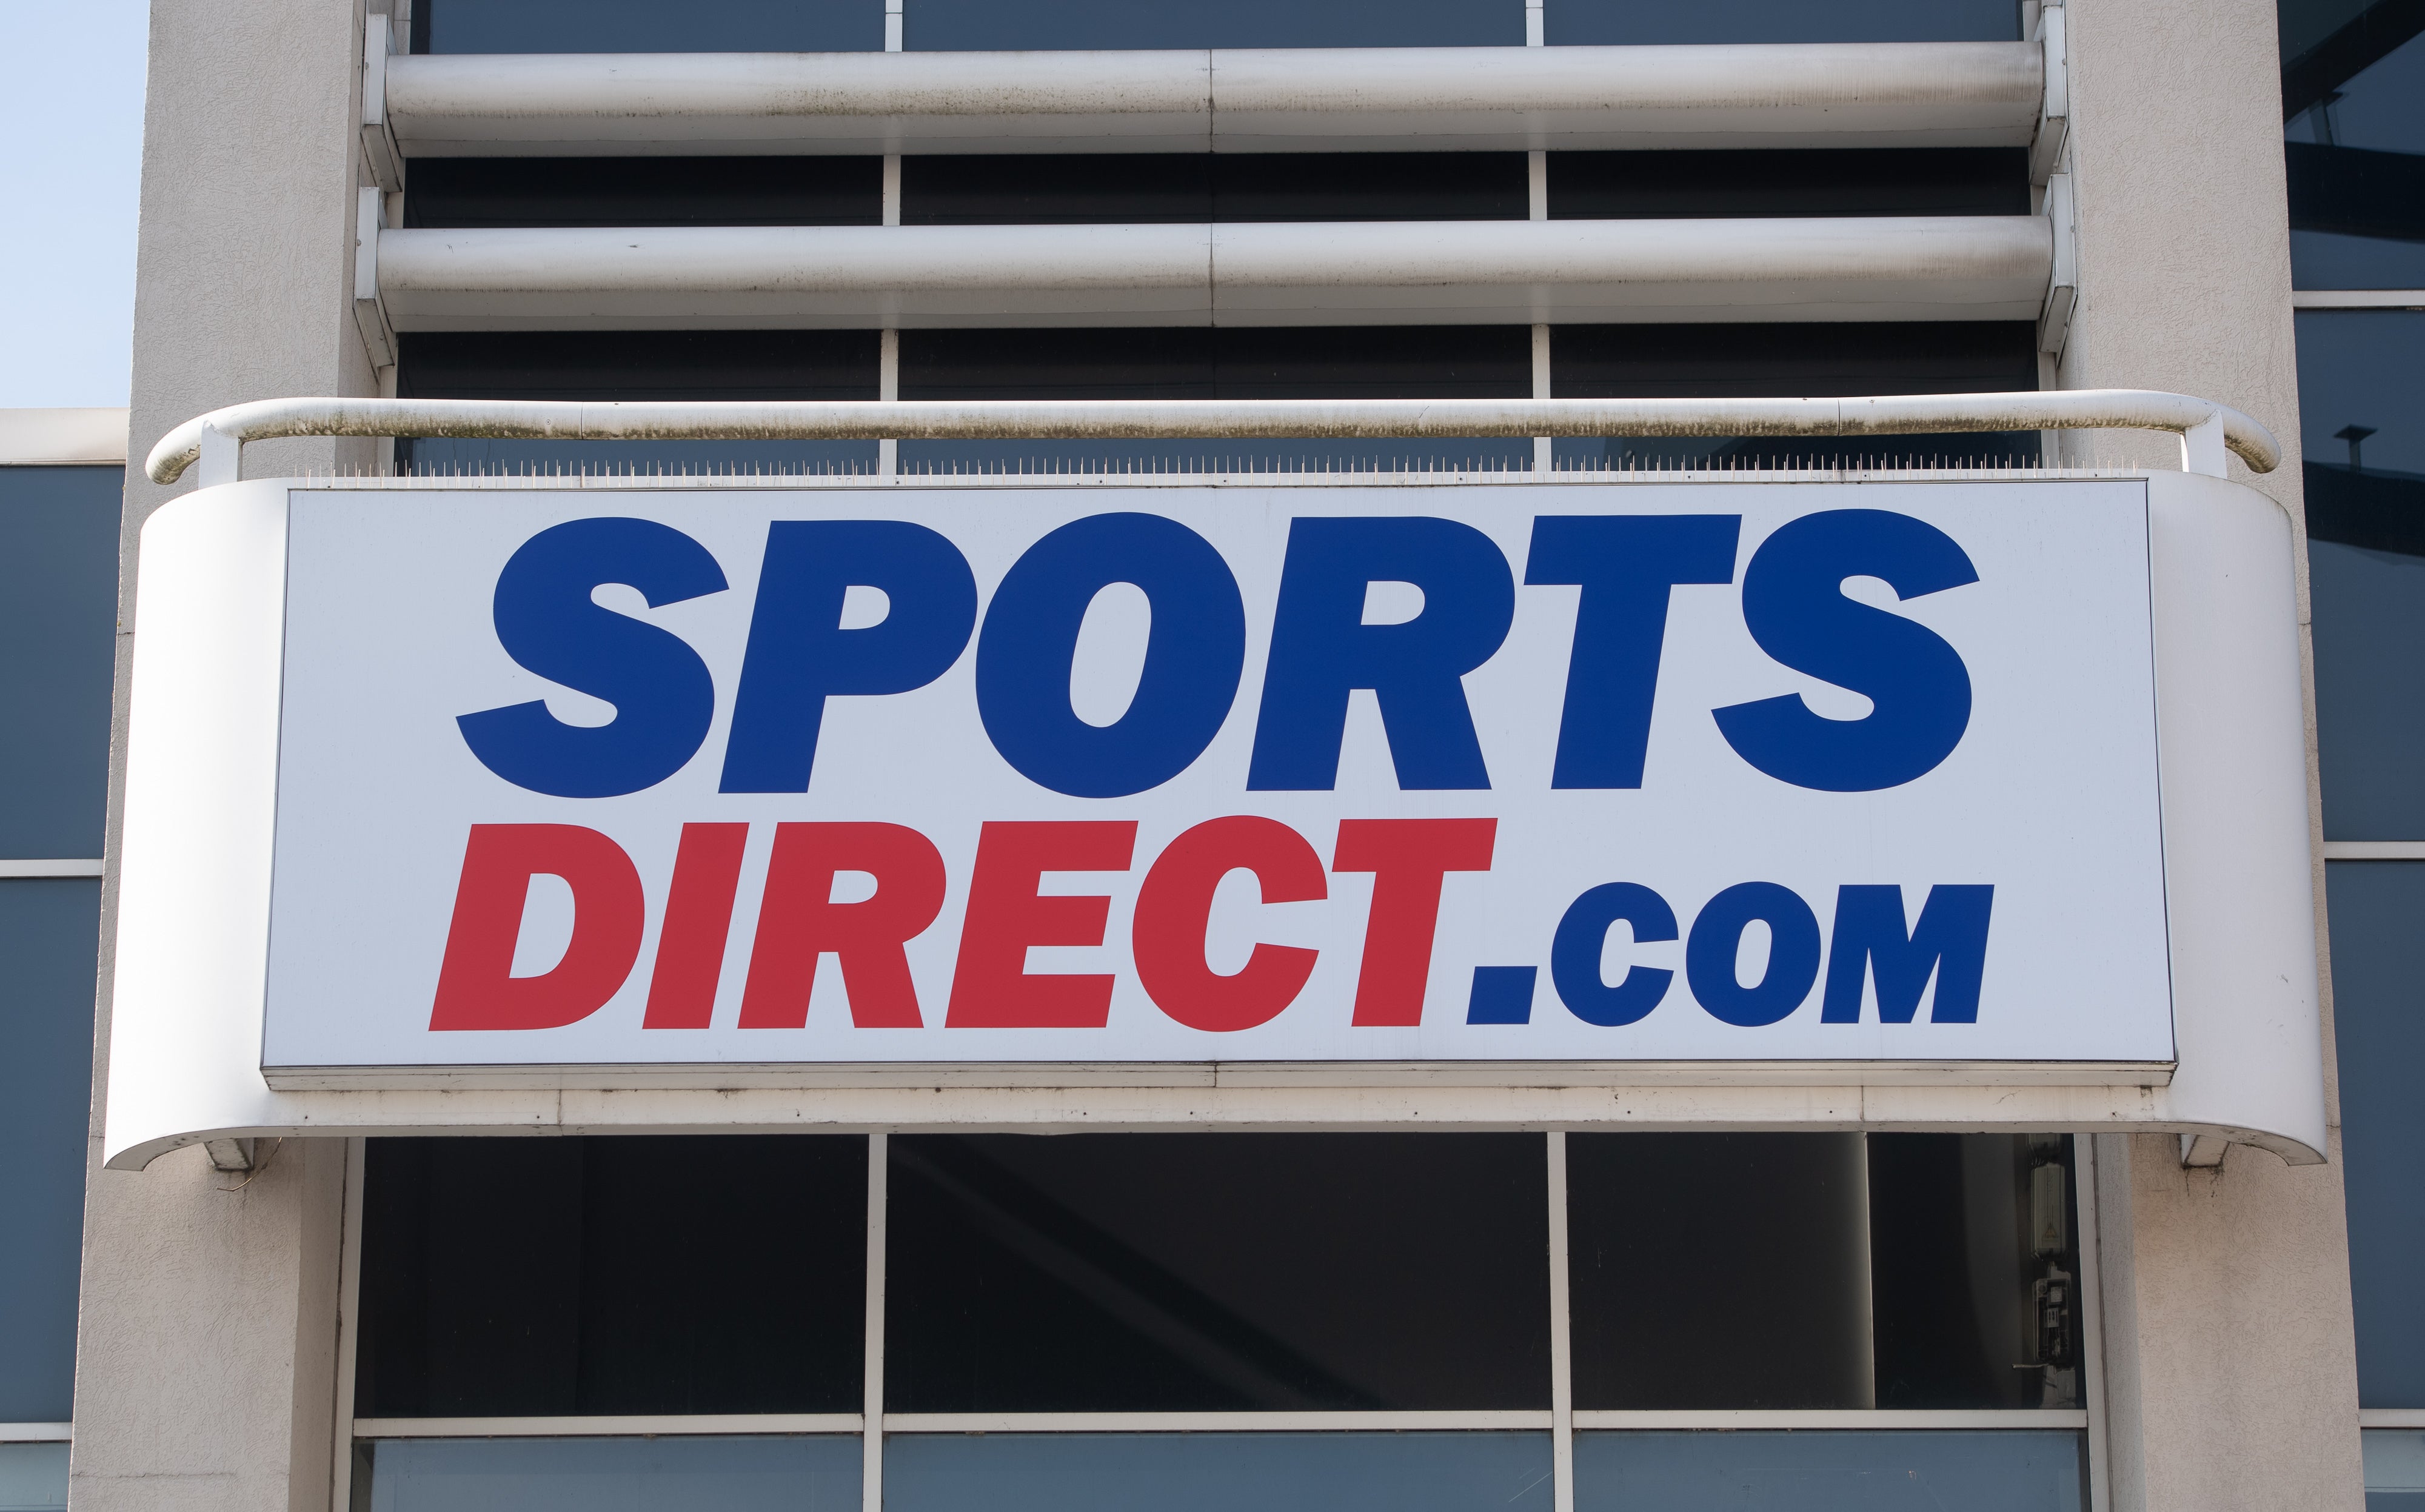 The new chief executive of Sports Direct owner Frasers Group could pocket a £100m shares windfall if he meets a ‘challenging but achievable’ target (Joe Giddens/PA)